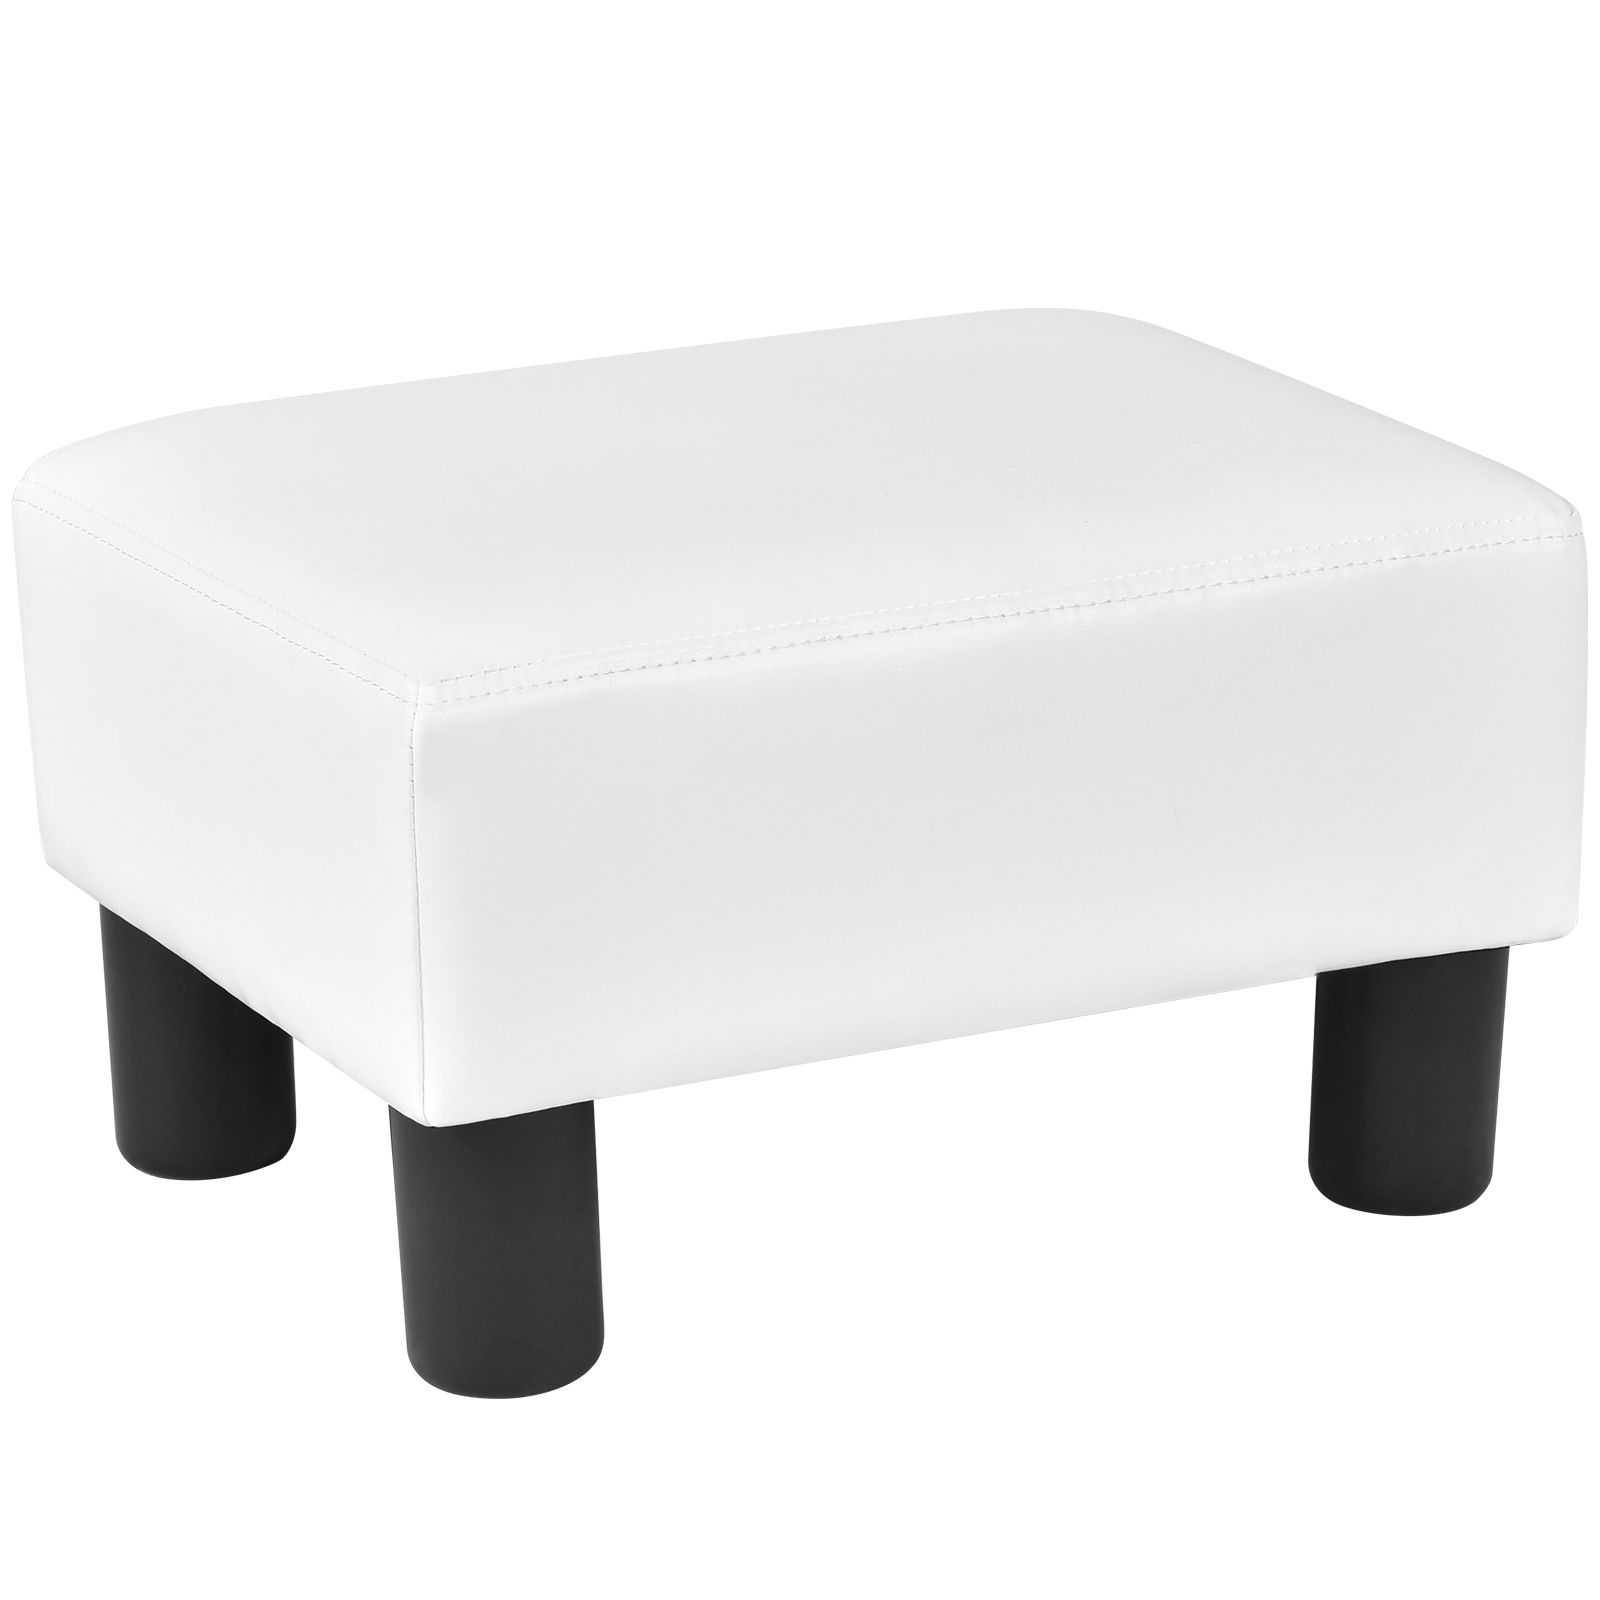 40 cm Rectangle PU Leather Small Footstool Ottoman White